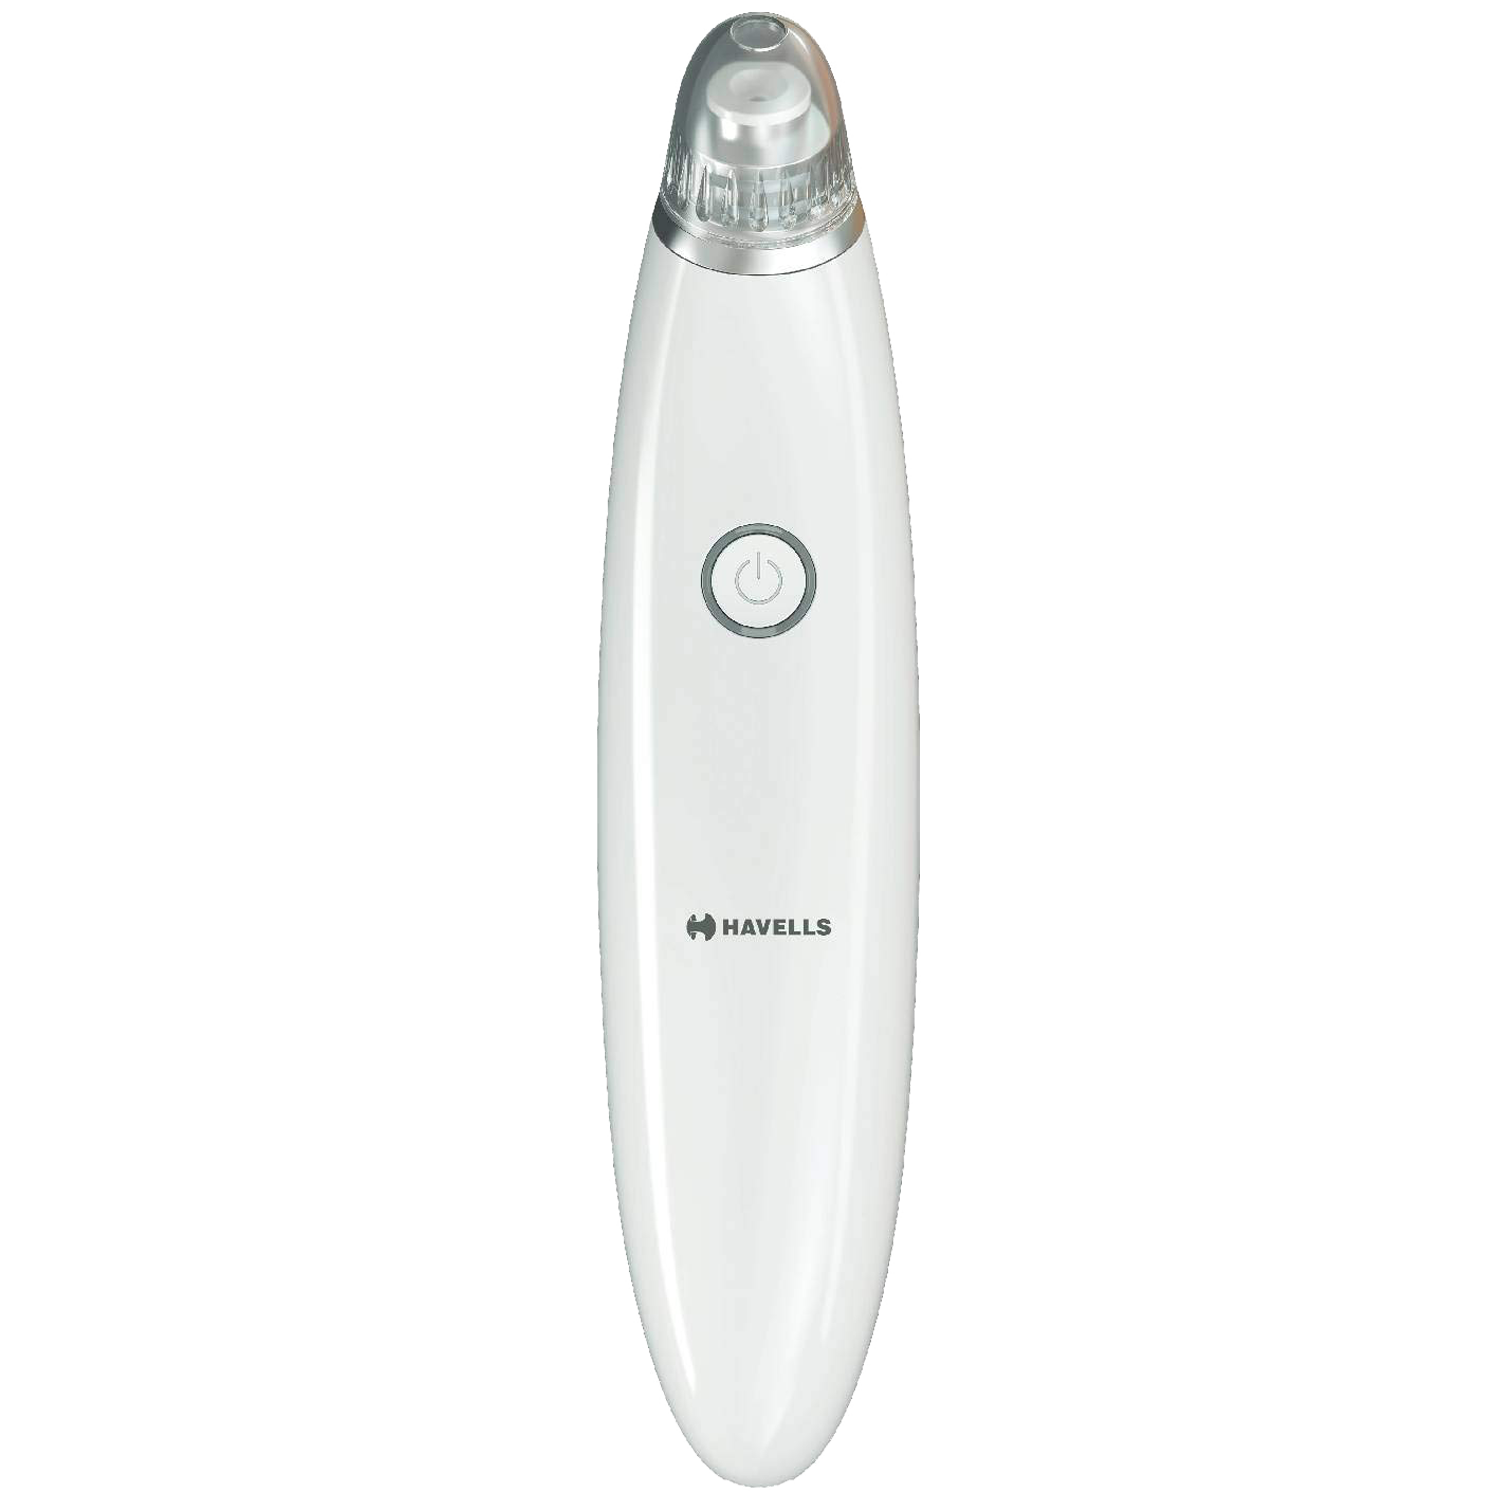 havells - havells Skin Care Cordless 4-in-1 Pore Cleanser (3 Suction Modes, SC5060, White)